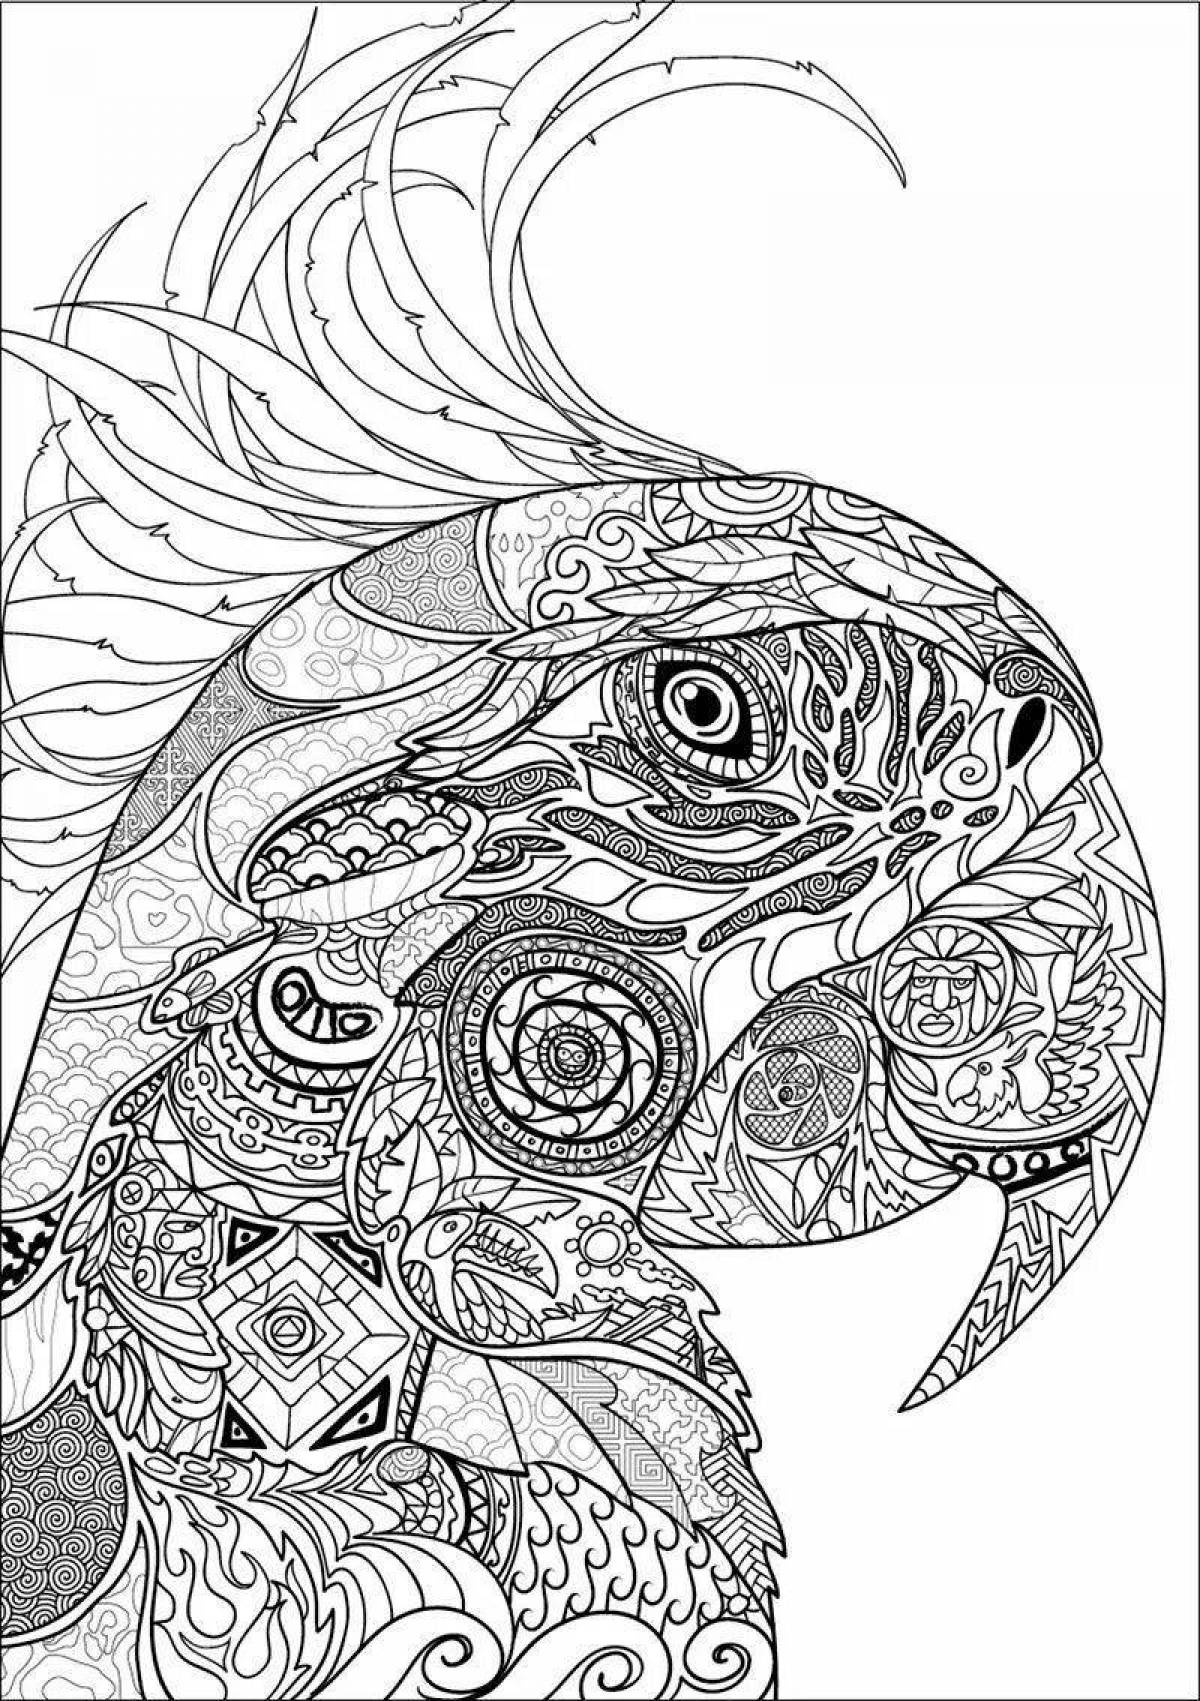 Fun intricate coloring pages